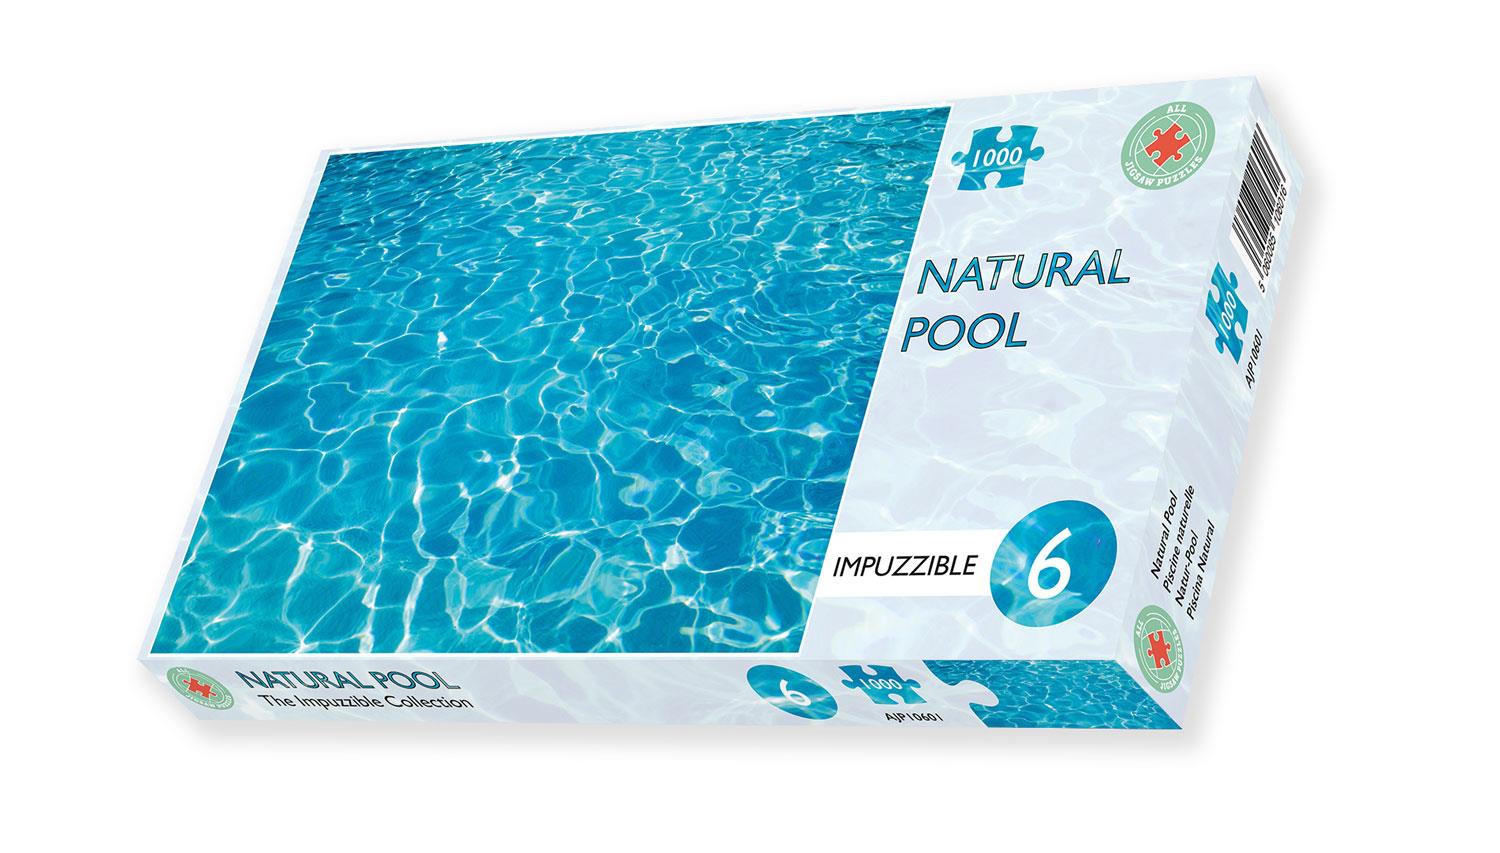 Natural Pool - Impuzzible No.6 - Jigsaw Puzzle (1000 Pieces)